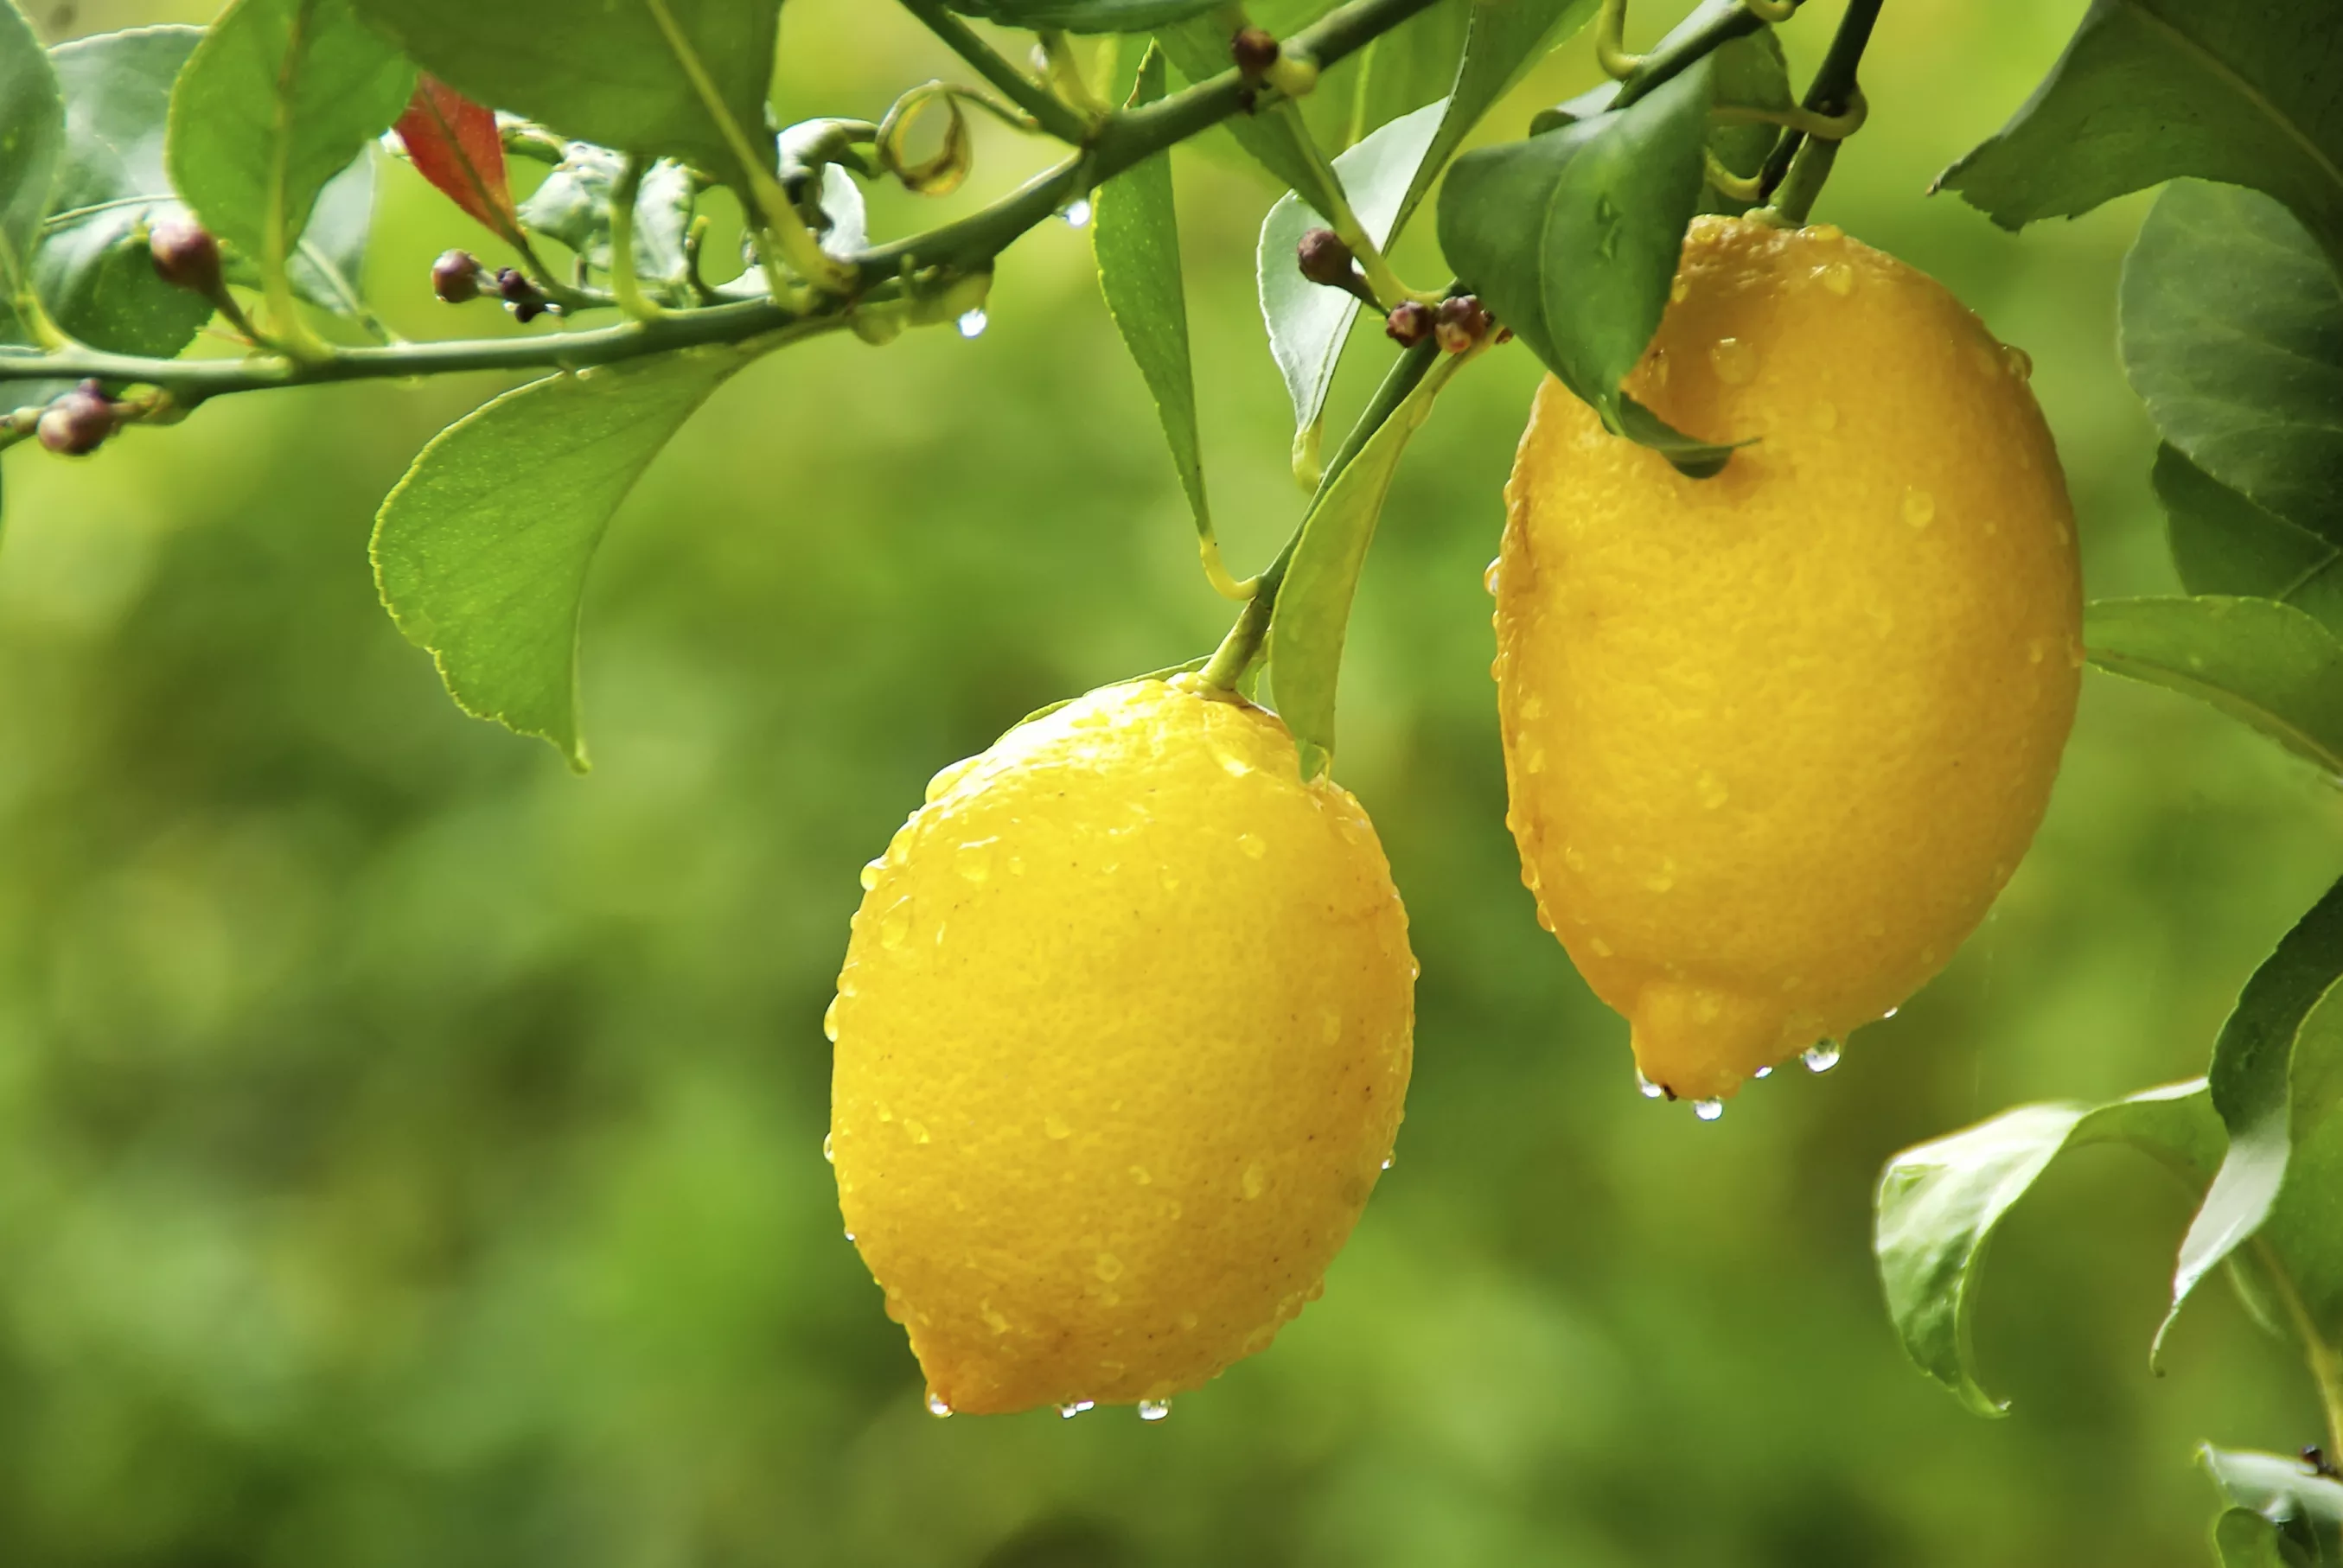 How To Grow A Lemon Tree From A Seed At Home